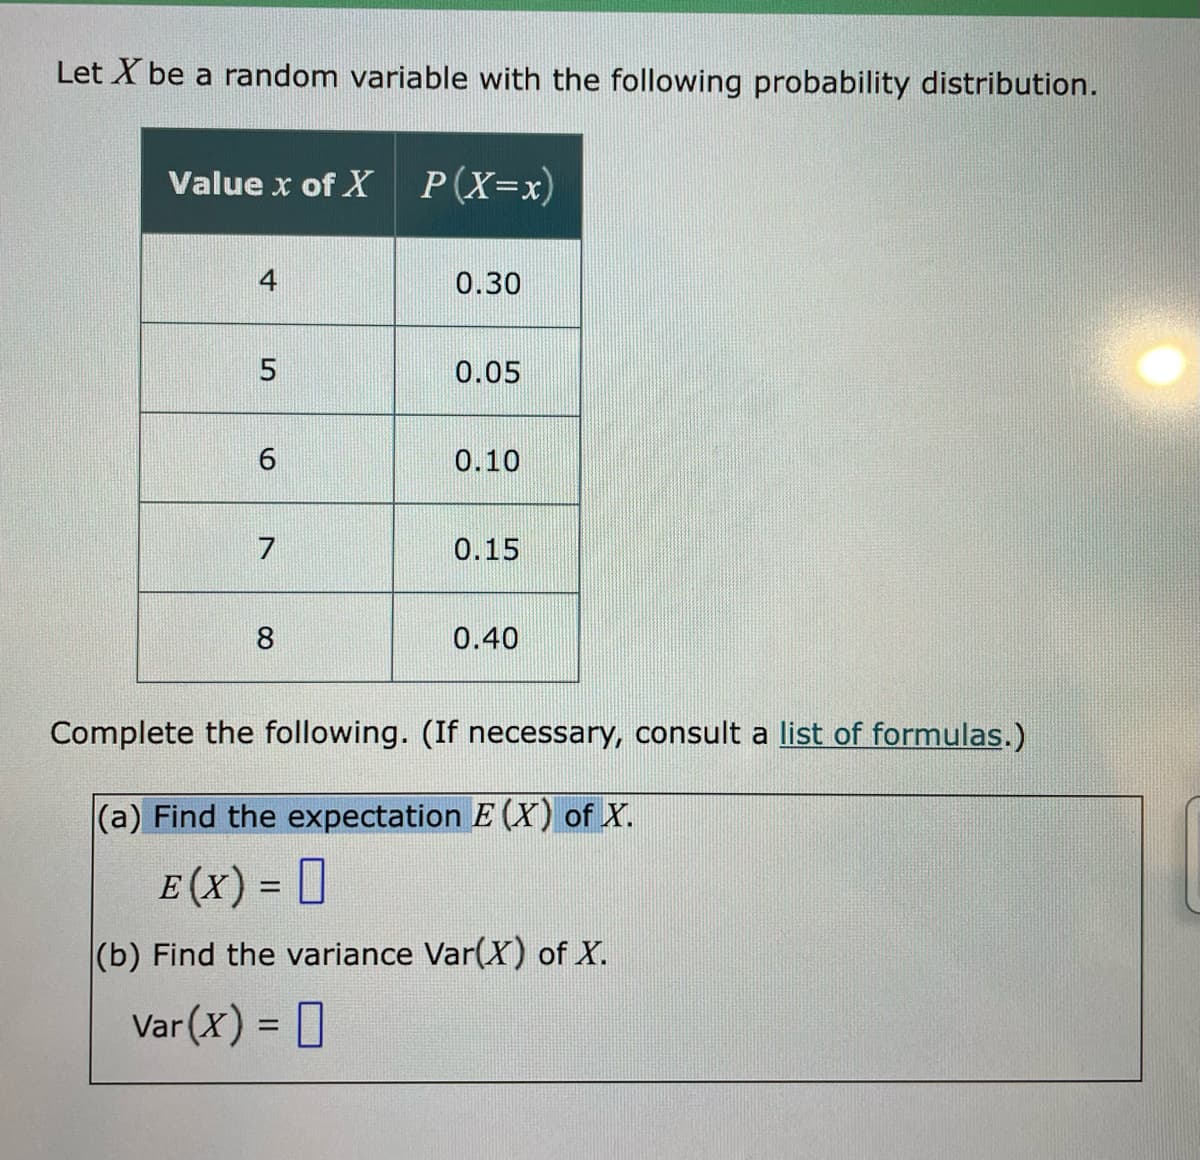 Let X be a random variable with the following probability distribution.
Value x of X
P(X=x)
4
0.30
0.05
0.10
7
0.15
8
0.40
Complete the following. (If necessary, consult a list of formulas.)
(a) Find the expectation E (X) of X.
E (x) = D
(b) Find the variance Var(X) of X.
Var (X) = ]
%3D
